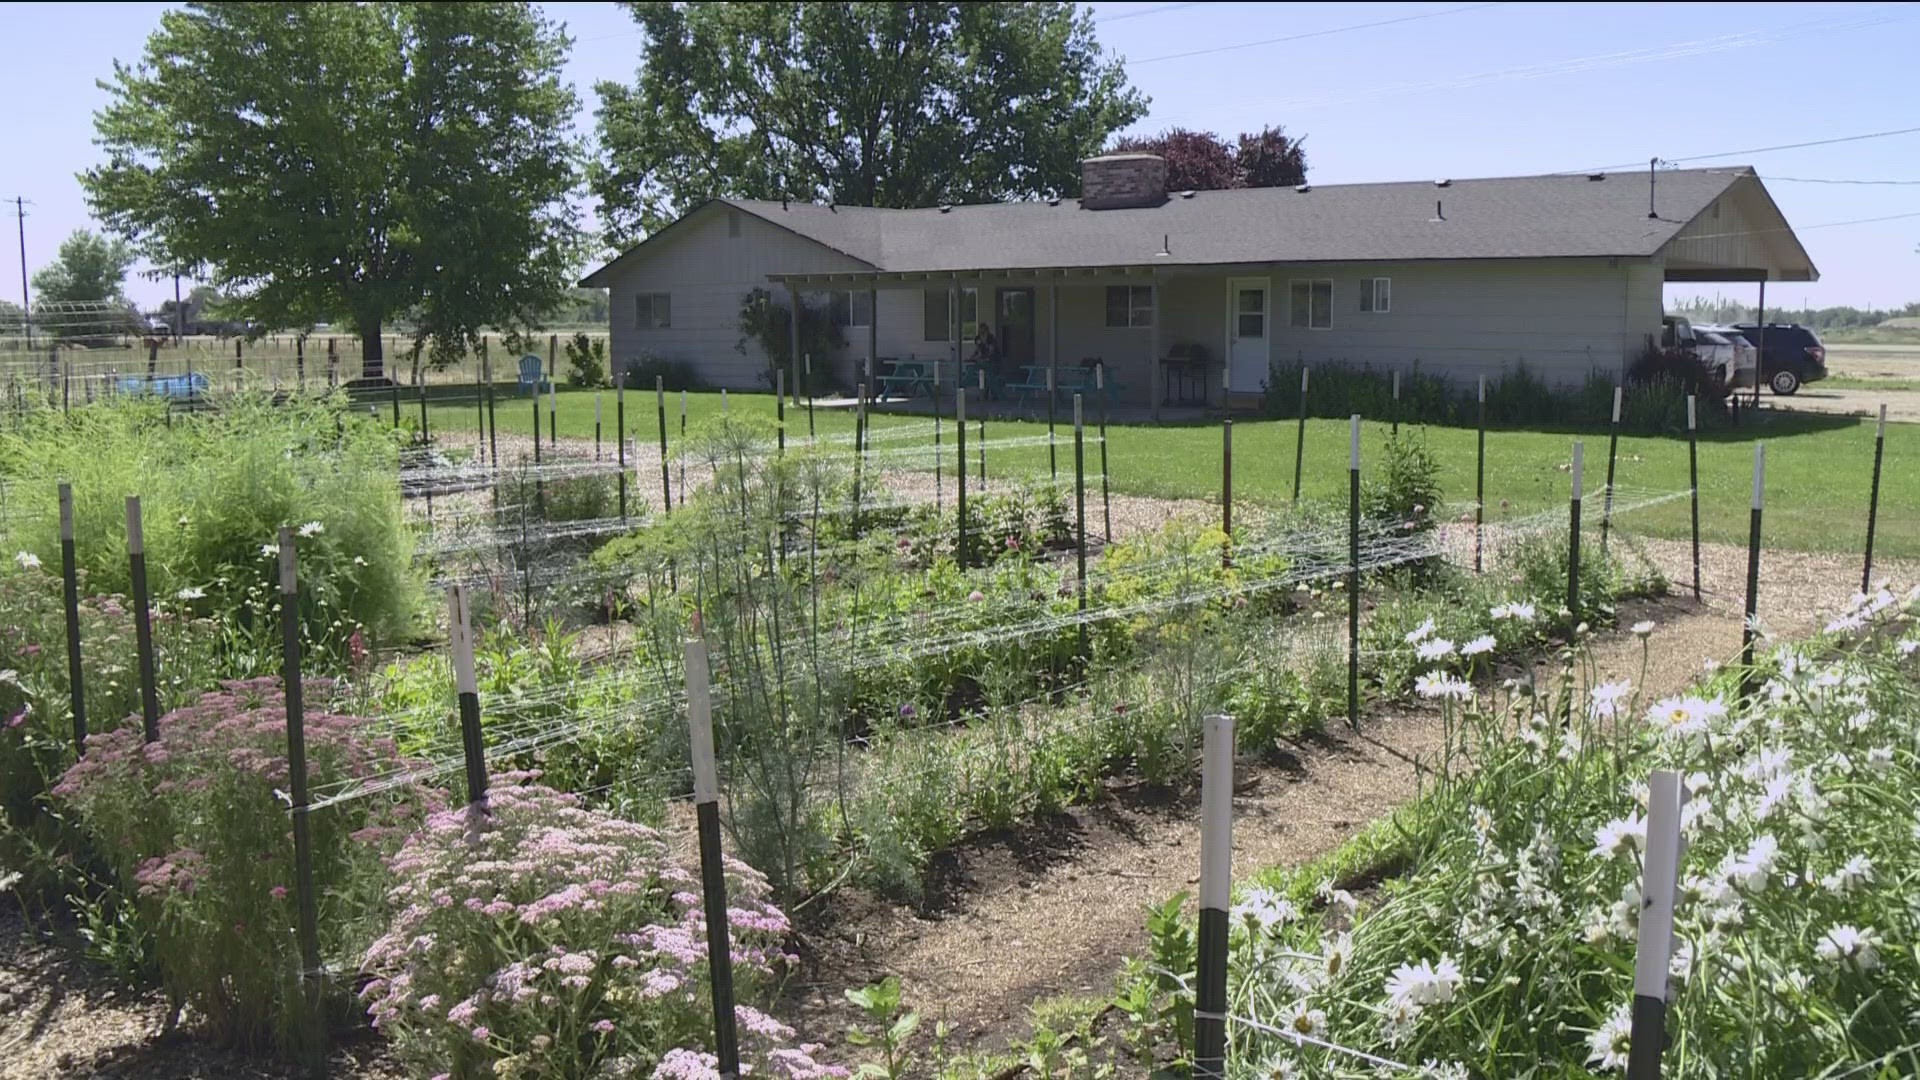 Canyon Springs Garden Outreach has produced an estimated 10 tons of fresh produce in just the last two years.